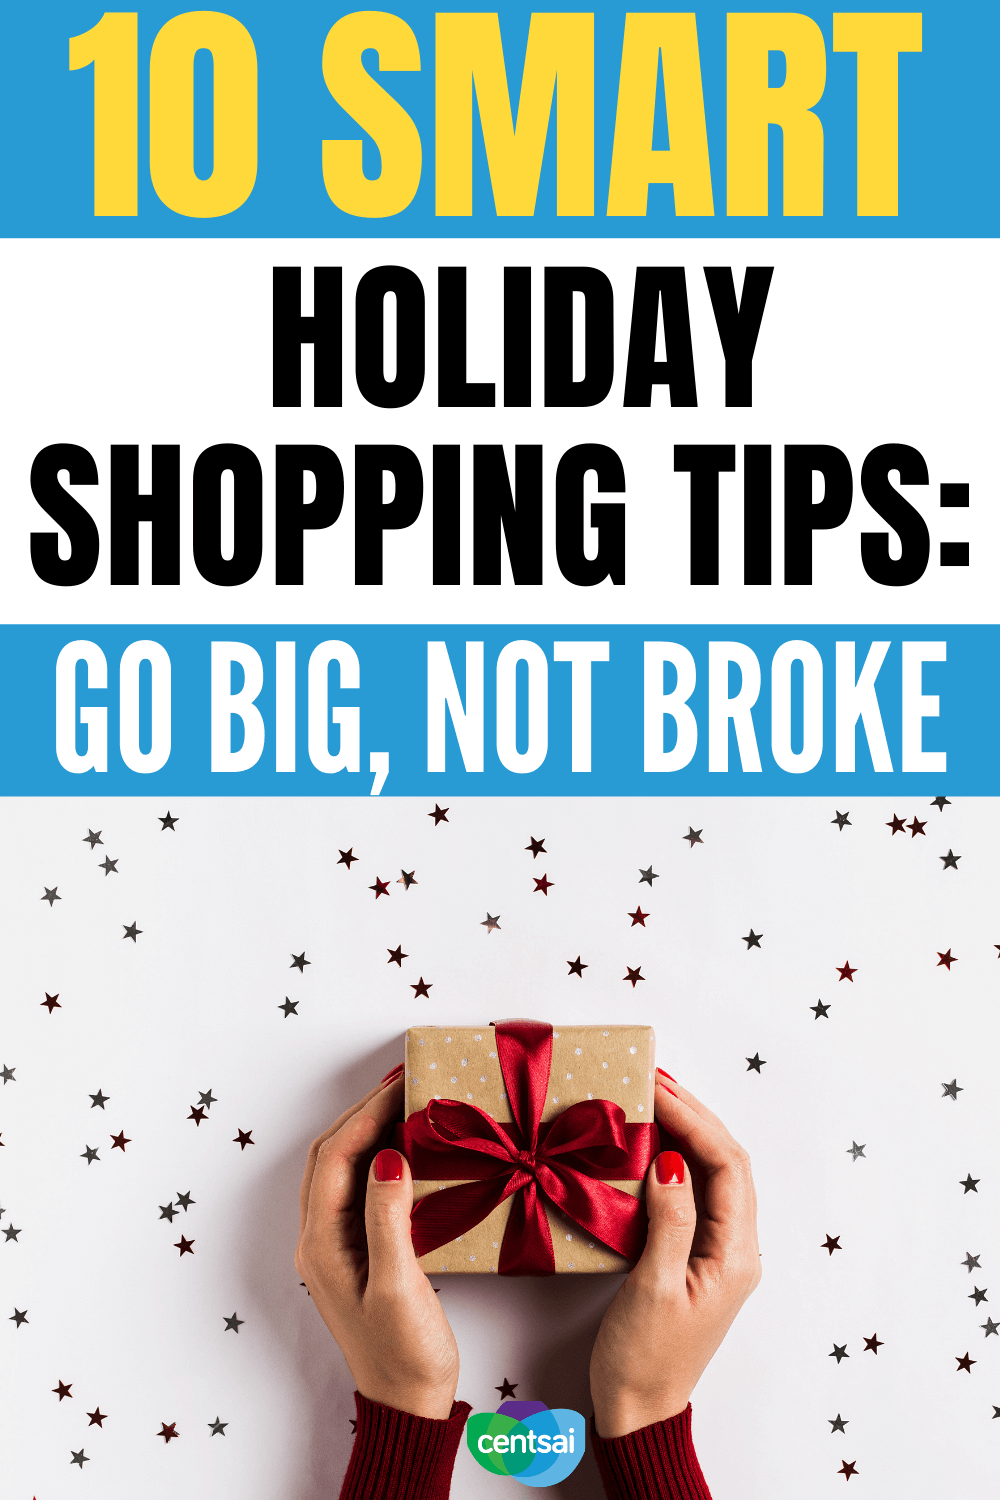 10 Smart Shopping Tips for Every Holiday. Holiday gifts don't have to break the bank. Check out these smart holiday shopping tips to knock gift-buying season out of the park. #holiday #budget #savingtips